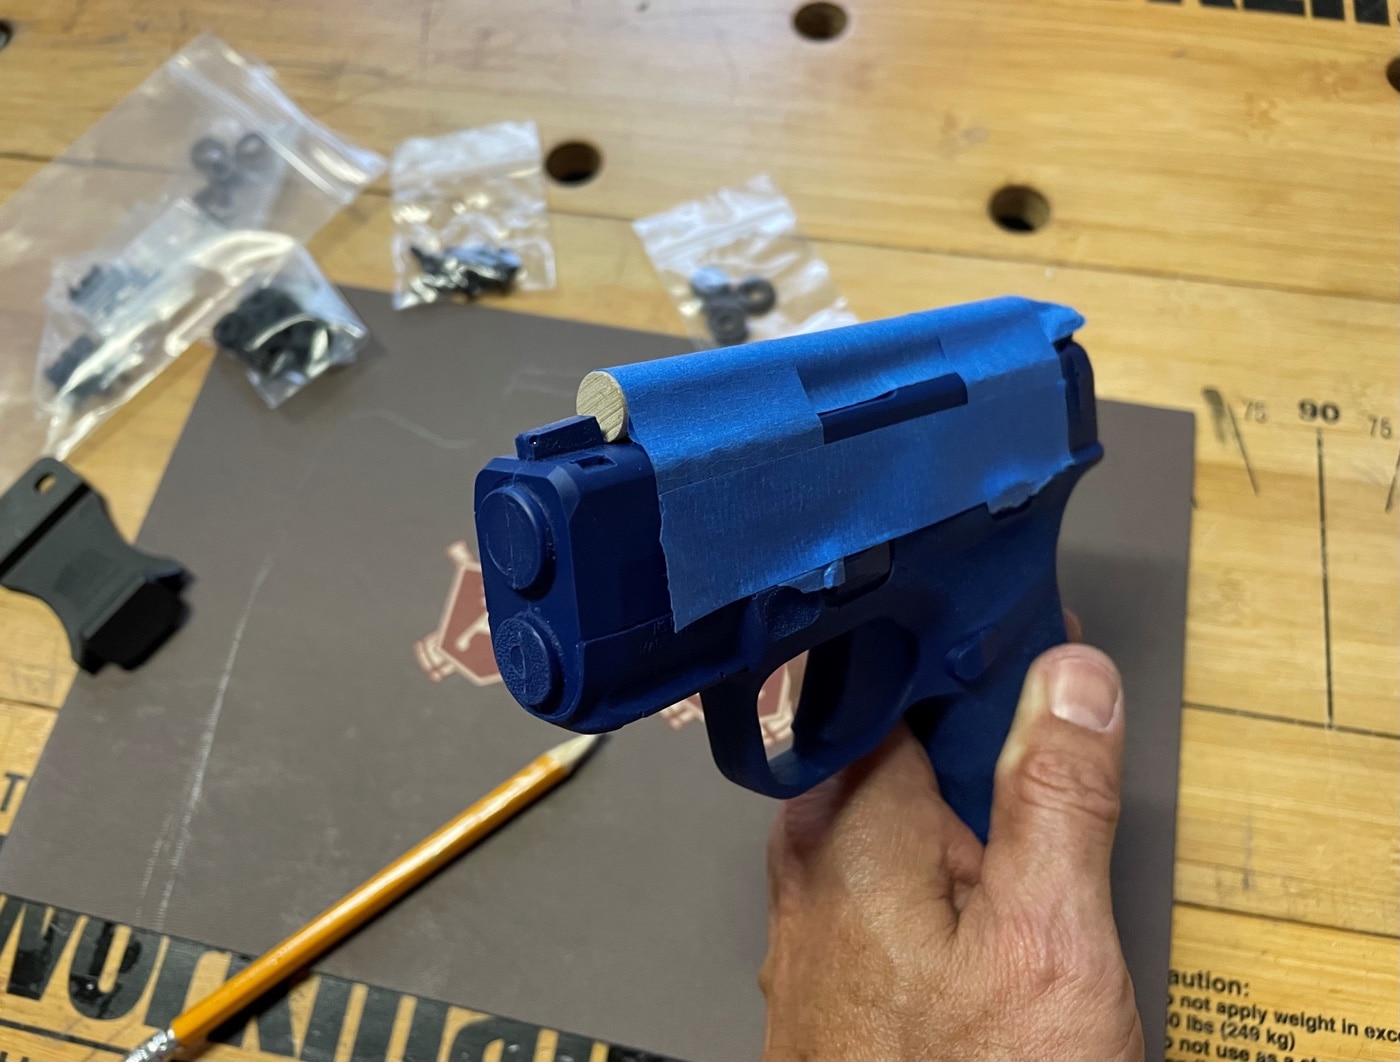 In this photo, the author shows how he used painters blue tape to attach a wooden dowel to the top of the Hellcat blue gun. When the Kydex is folded over the top of the gun, the dowel will ensure that there will be room to spare for the front sight to enter and exit the rig smoothly. With the dowel in place, you can use a heat gun to warm the Kydex to achieve a precise fit. 